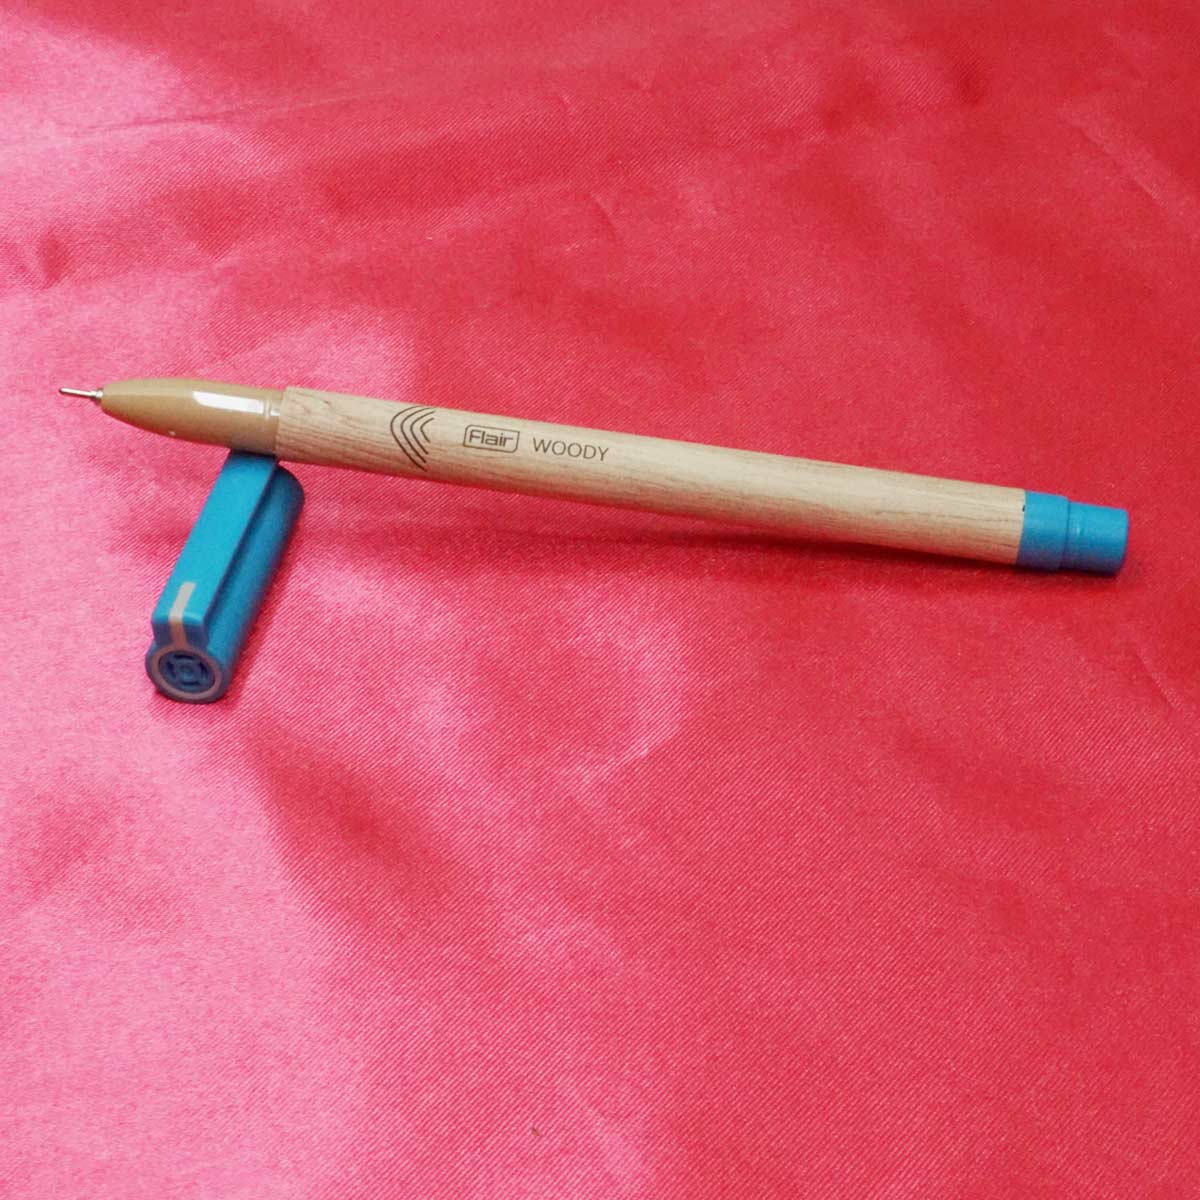 Flair Woody Wood Color Body With Fine Tip Blue Writing Blue Cap Type Ball Pen SKU 21679